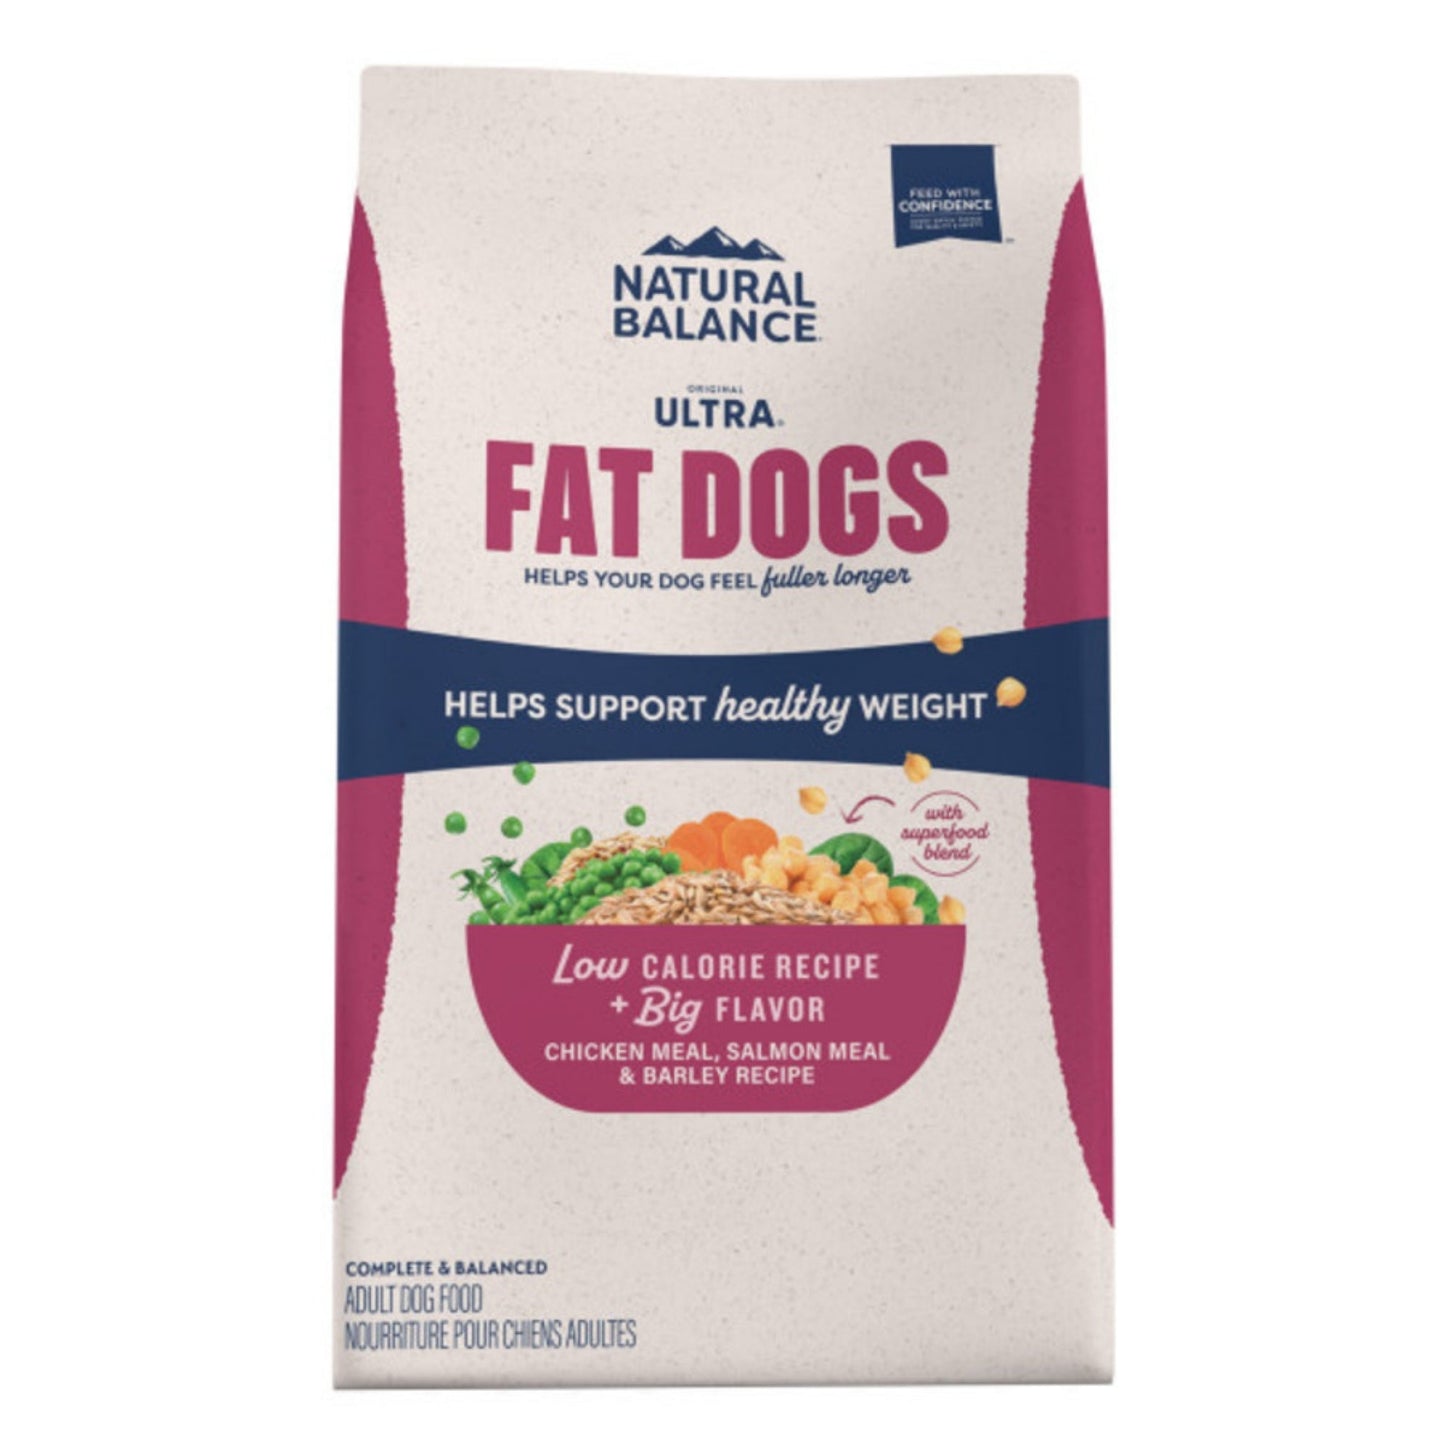 Natural Balance Pet Foods Ultra Fat Dogs Low Calorie Dry Dog Food Chicken & Salmon, 1ea/11 lb